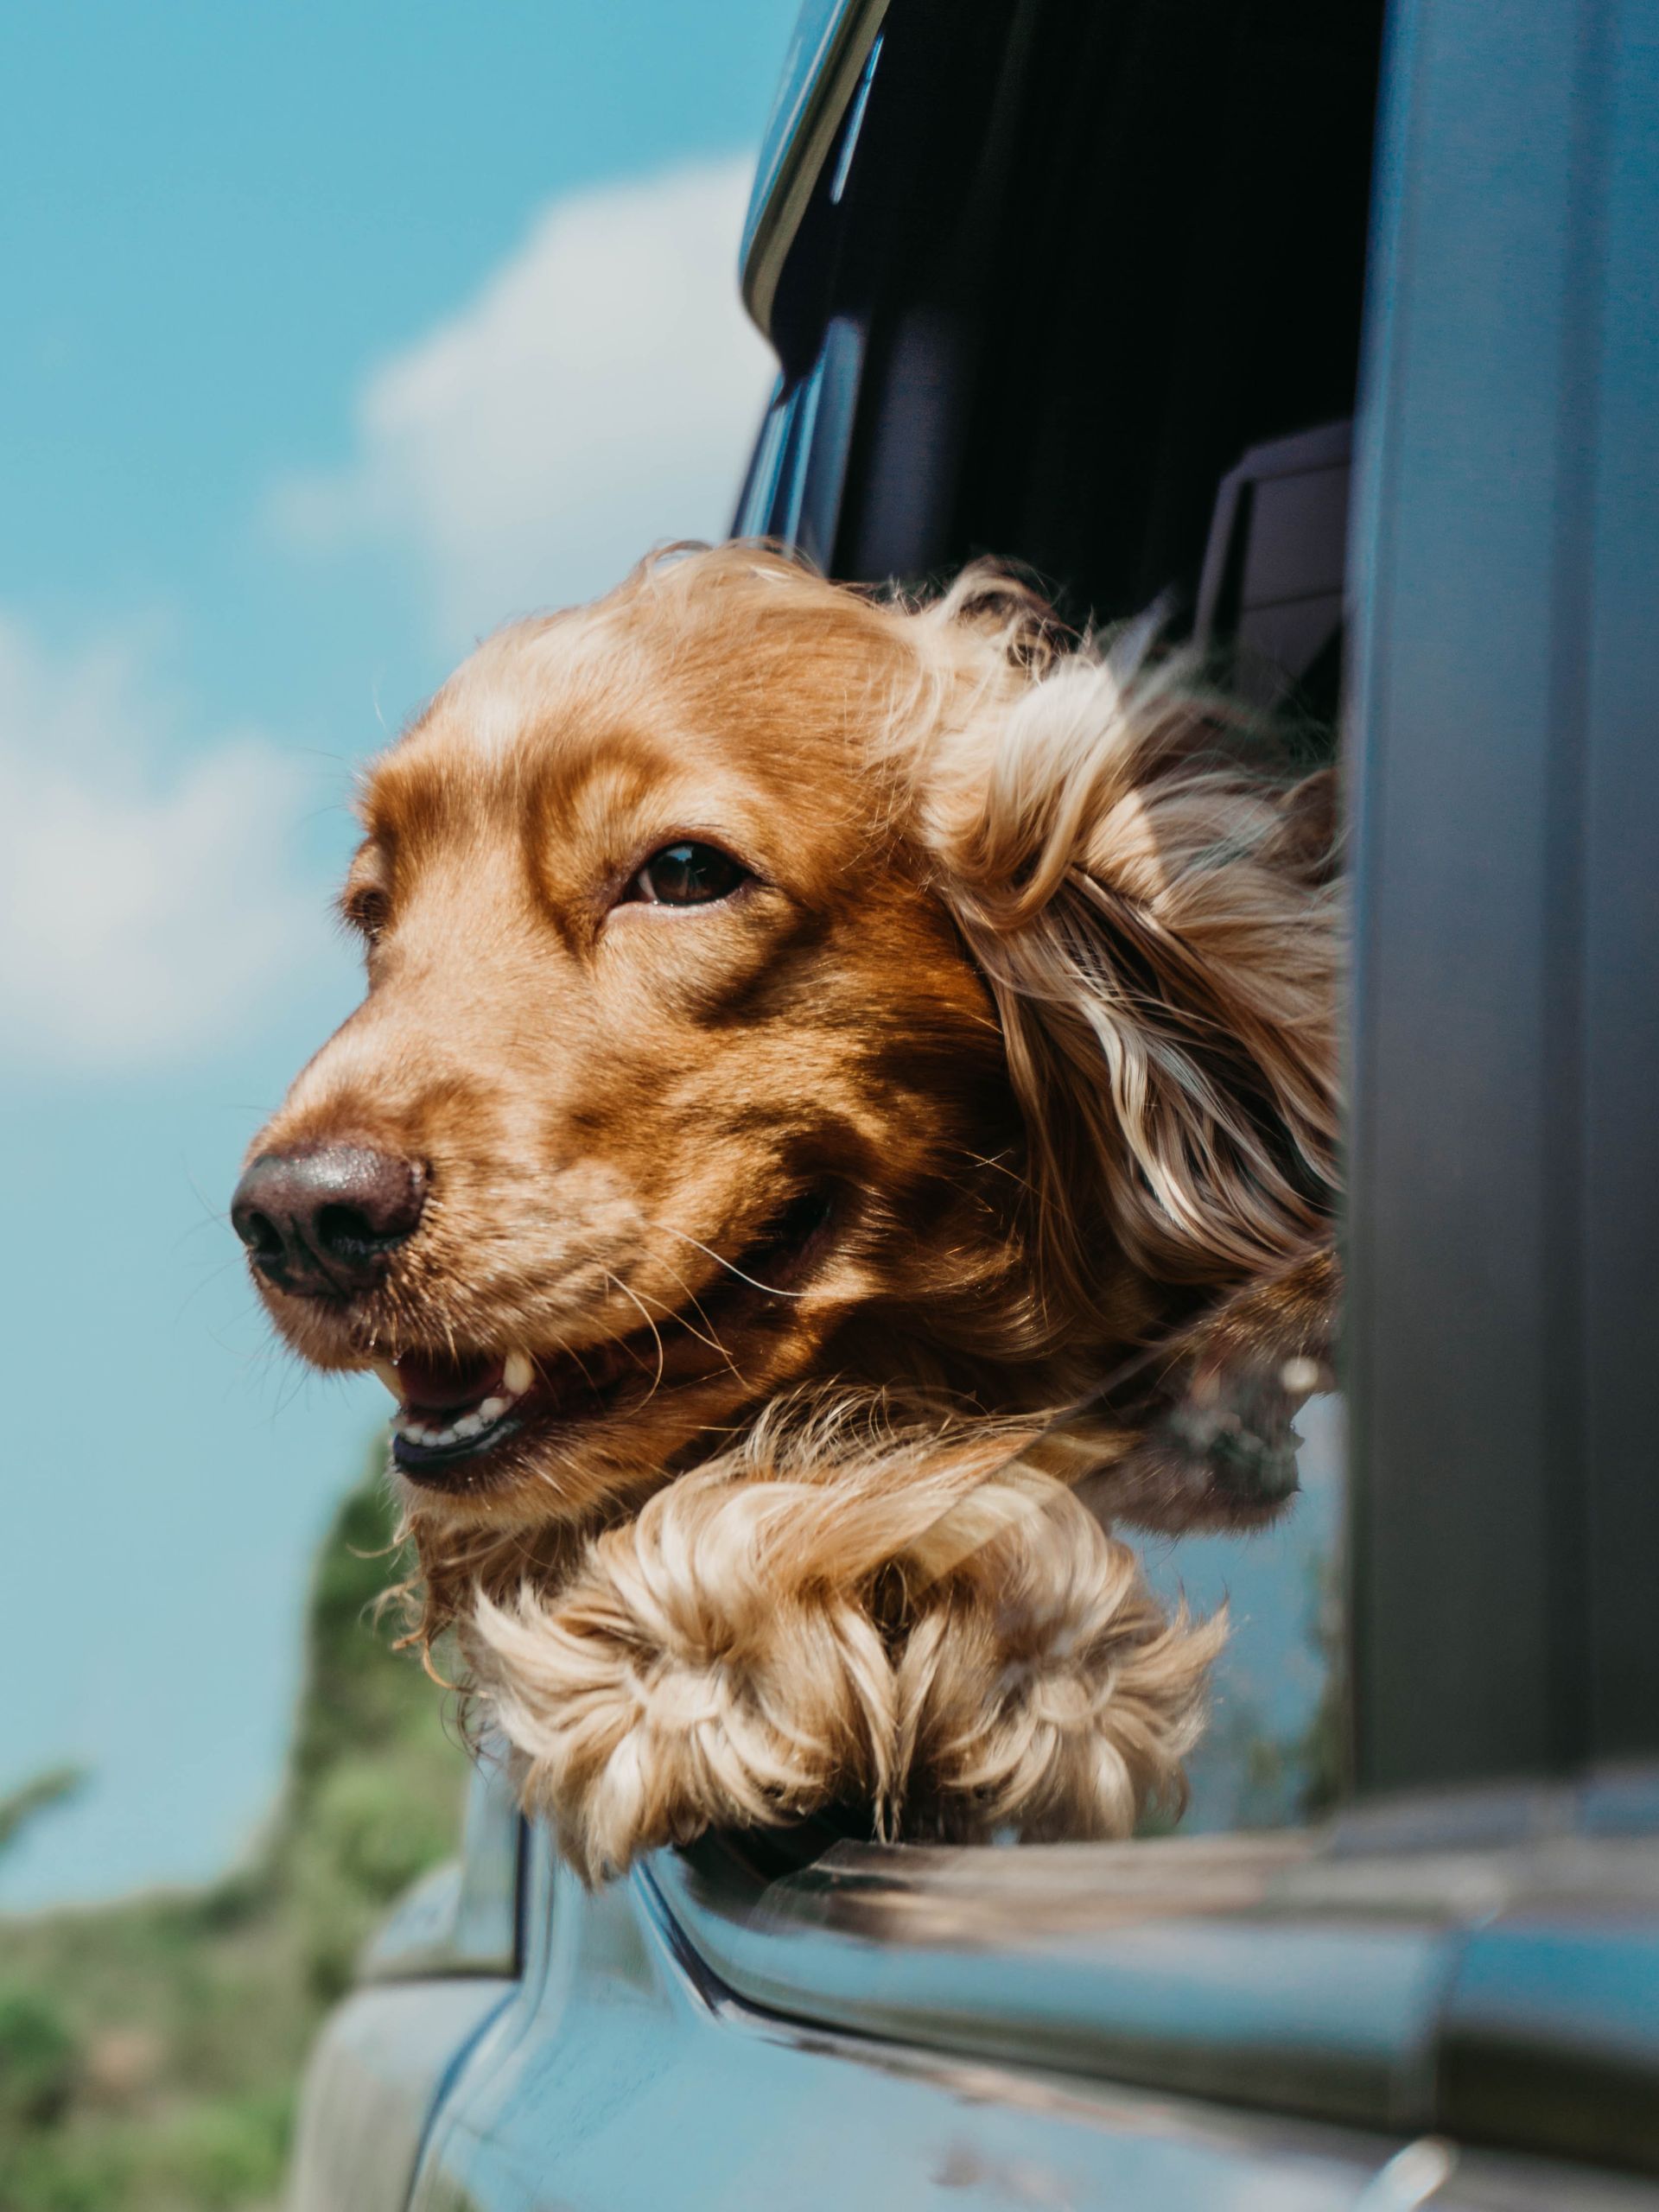 a dog is sticking its head out of the window of a car .